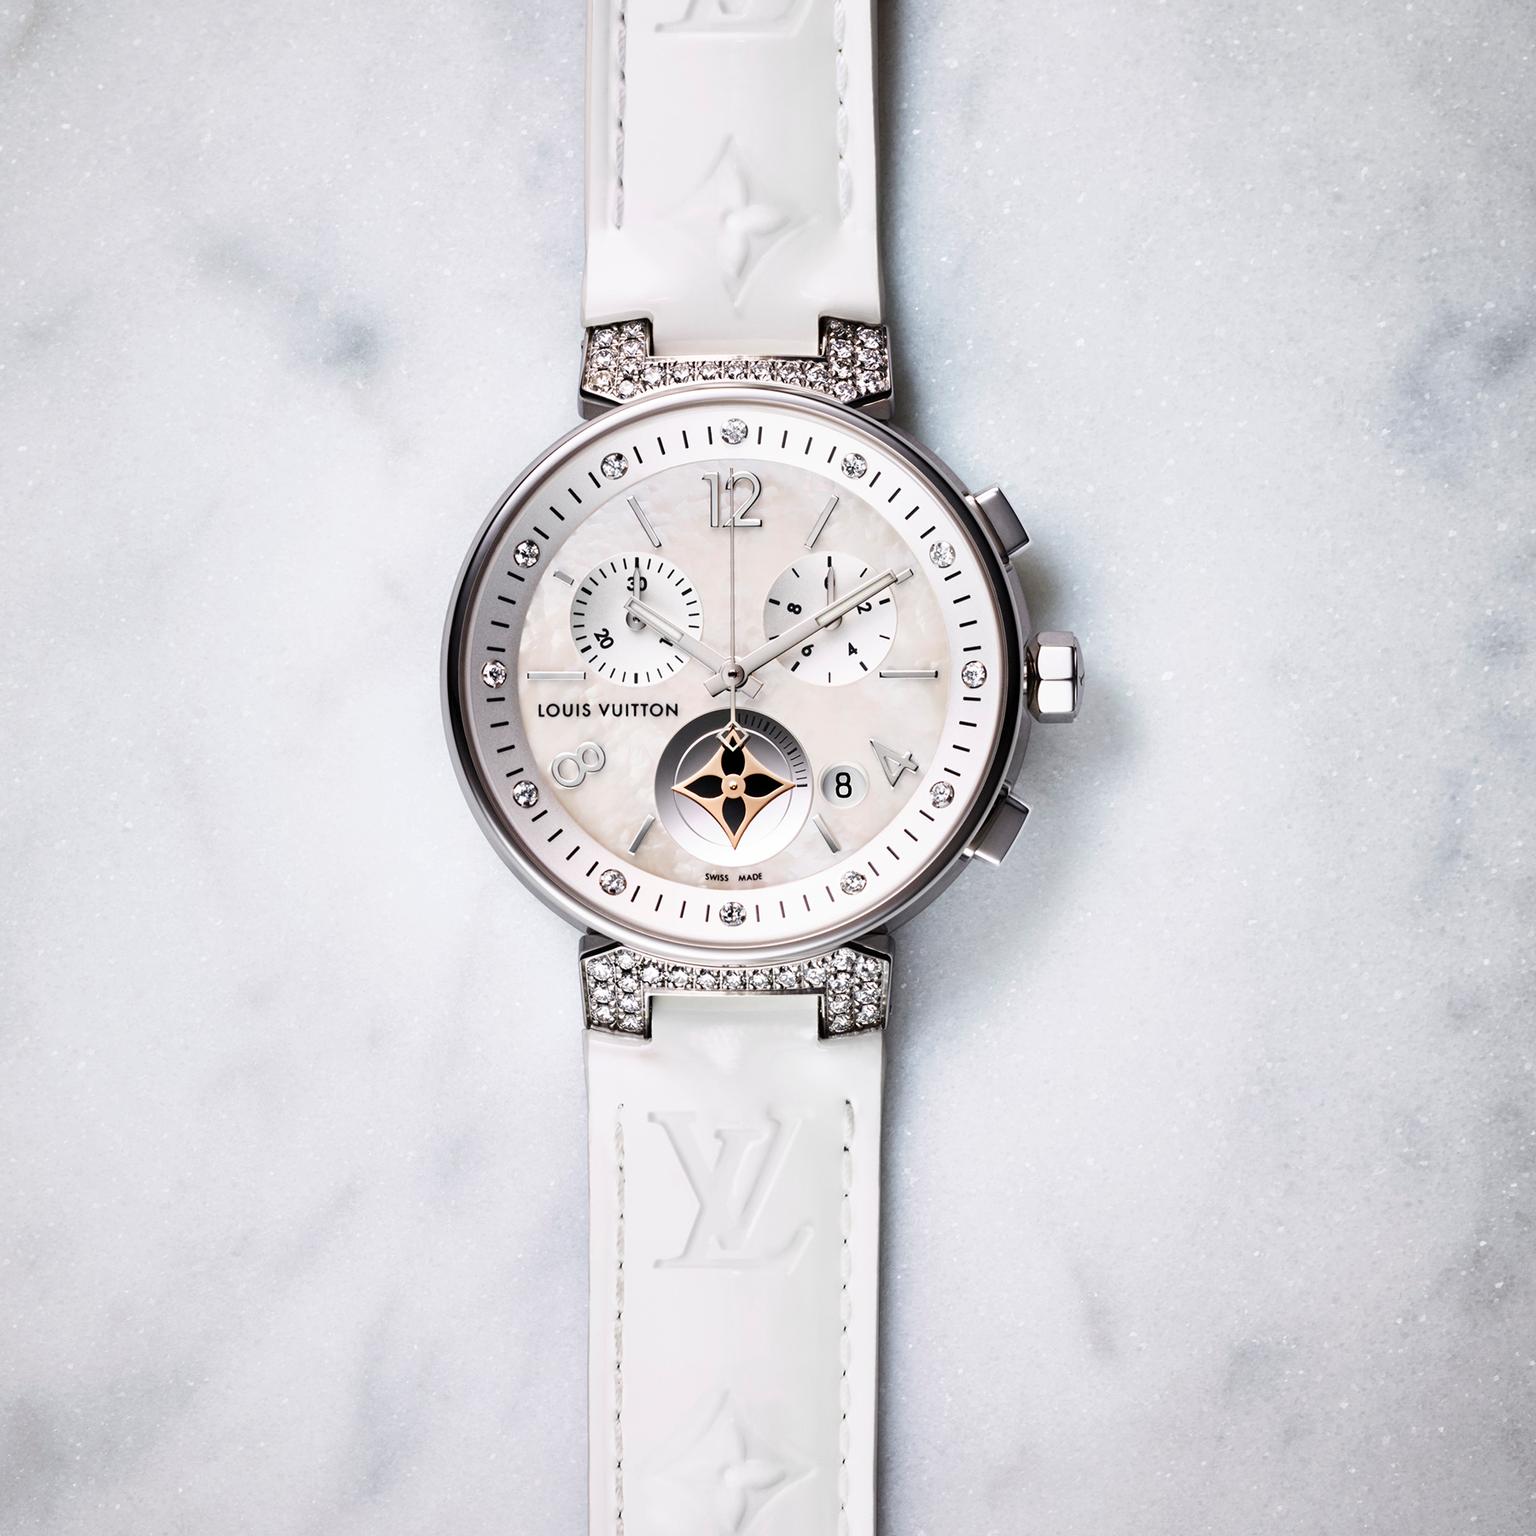 Tambour Moon Star Chronograph White watch with mother-of-pearl and diamonds, Louis Vuitton